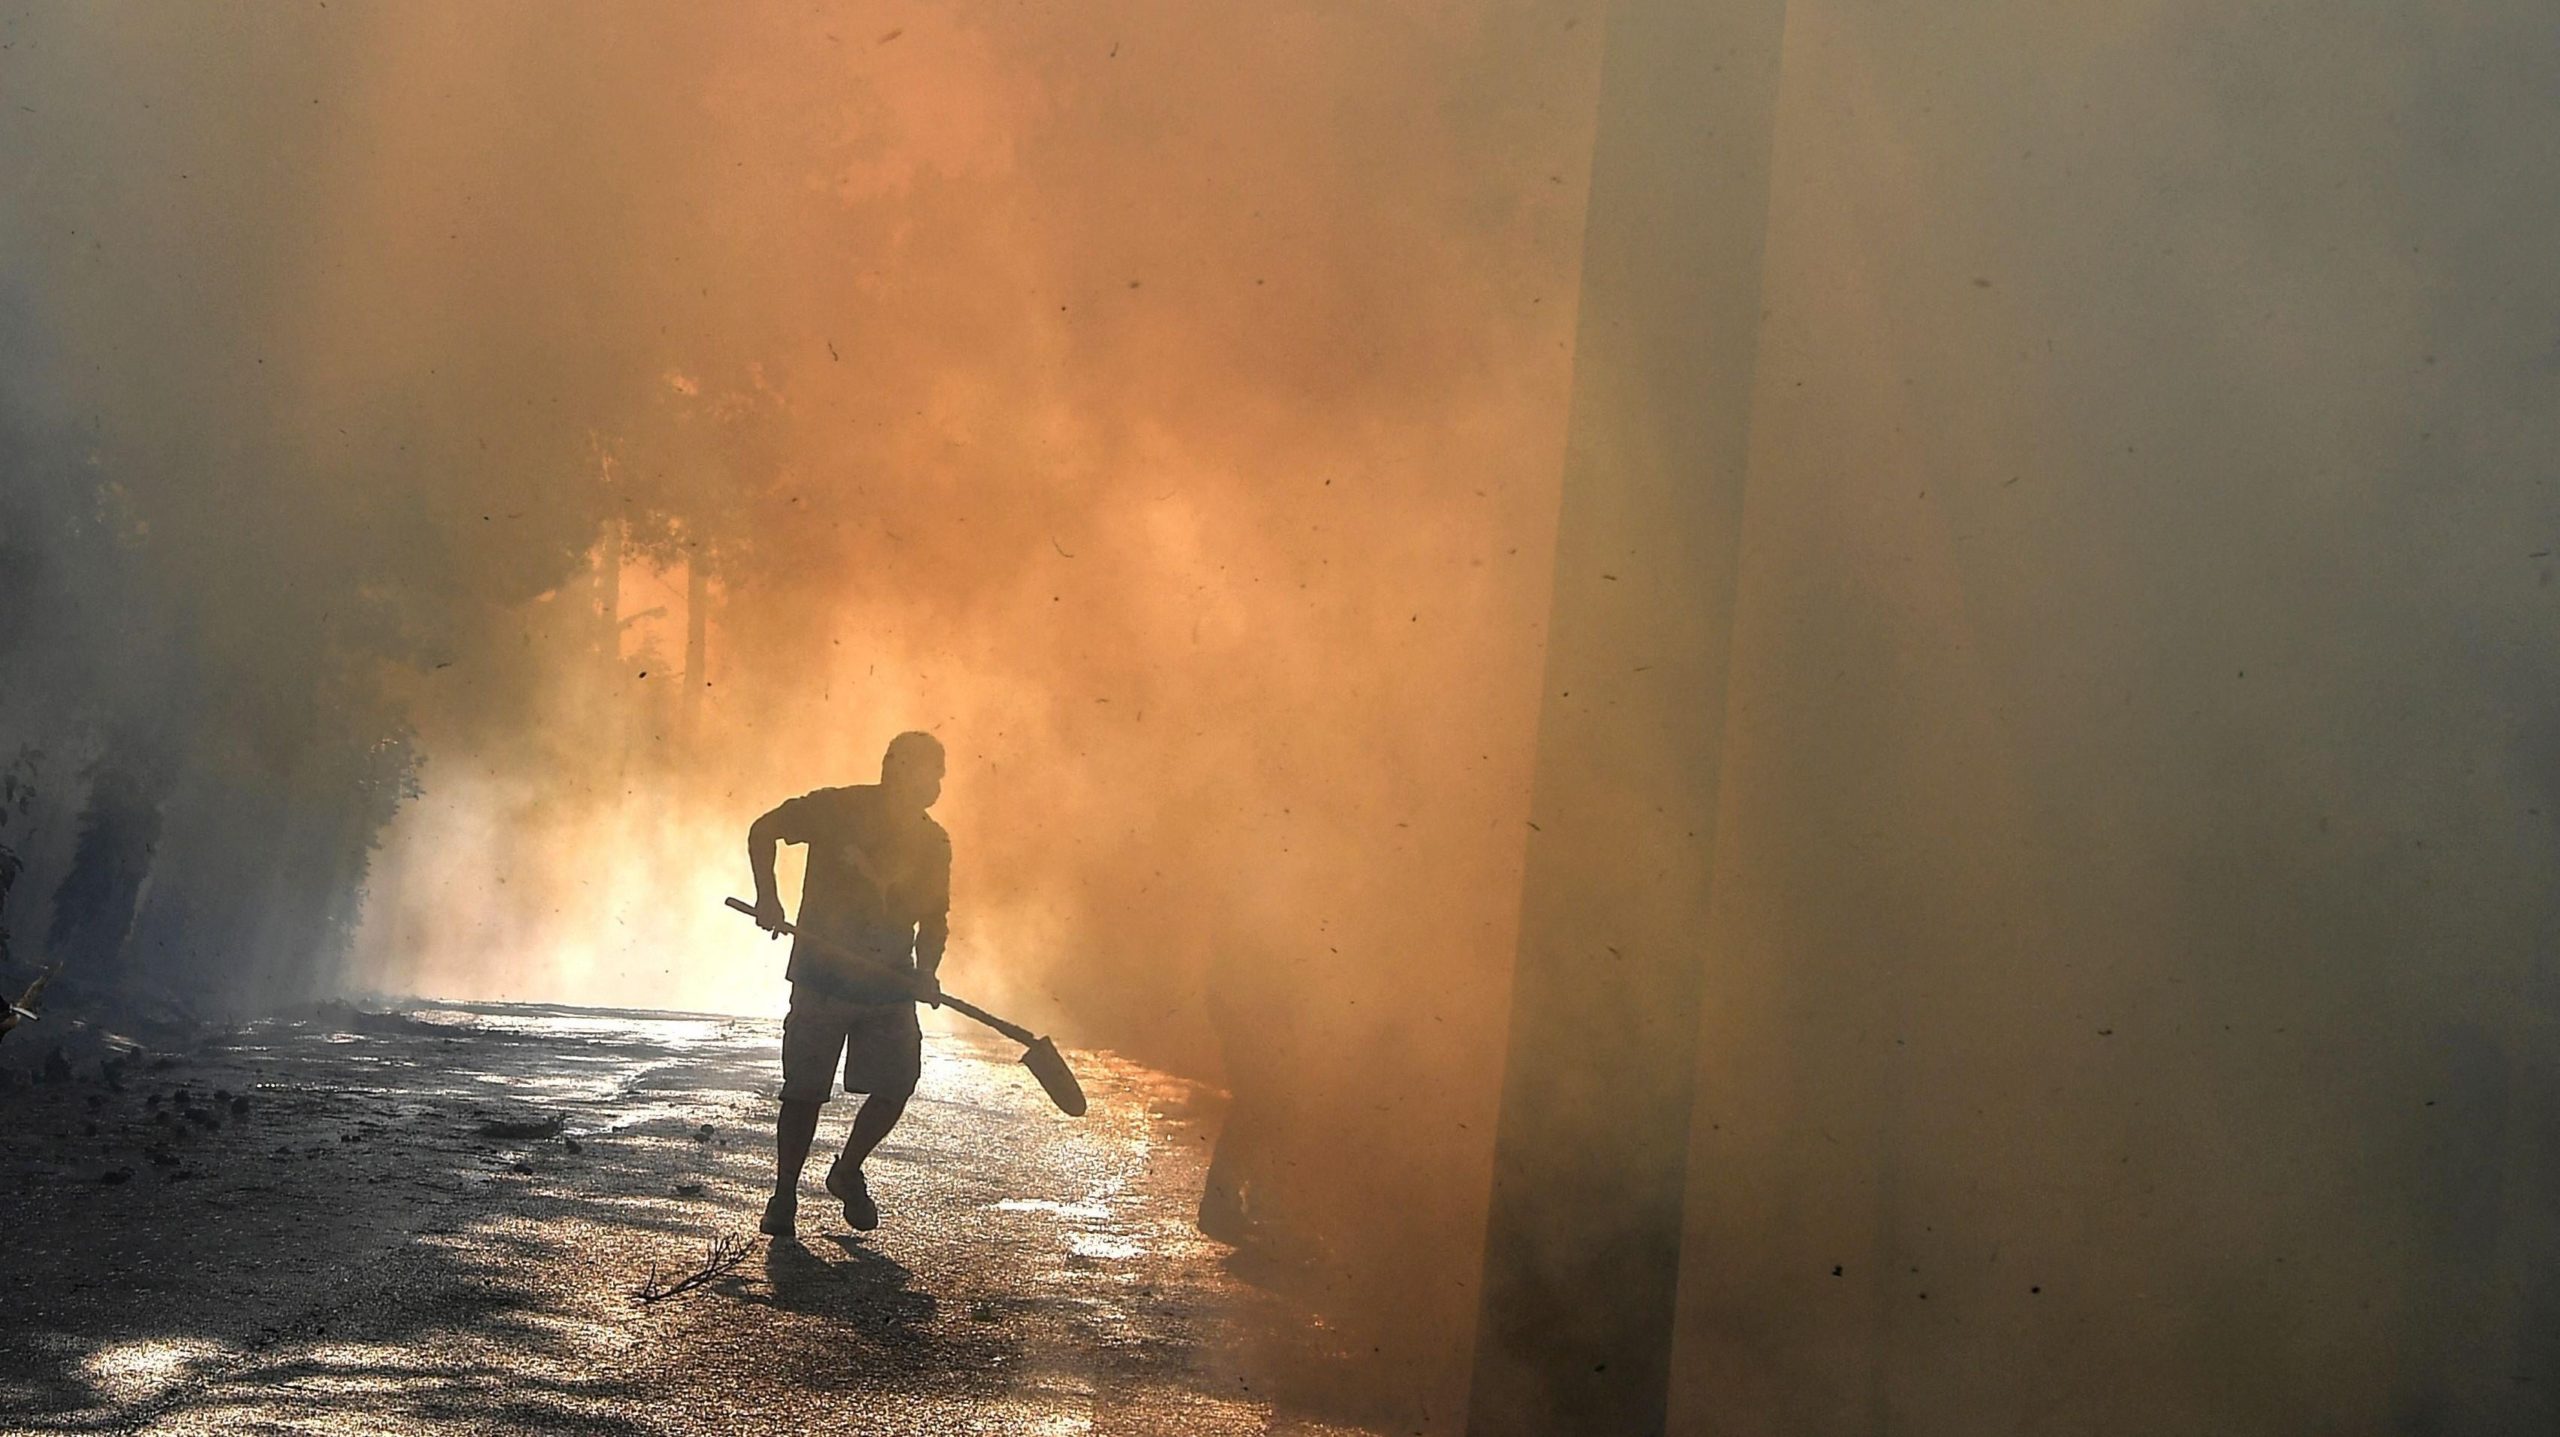 A local resident runs to fight a fire in Thrakomakedones, near Mount Parnitha, north of Athens, Greece, on August 7, 2021.  (Photo: Louisa Gouliamaki, Getty Images)